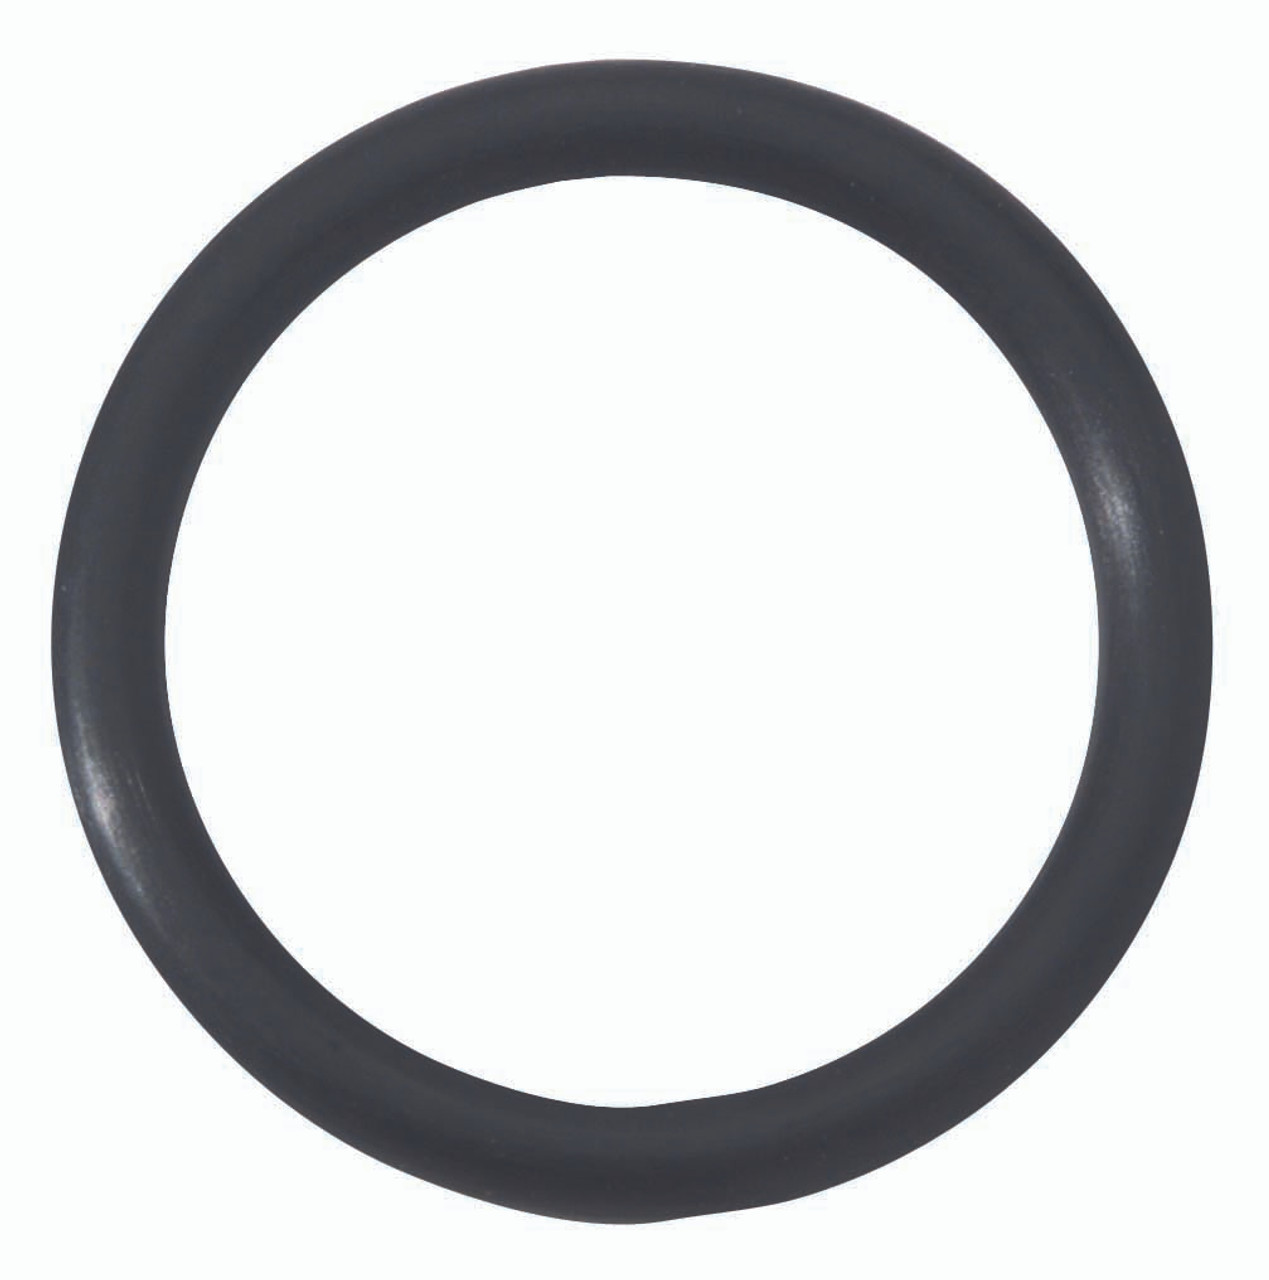 Spartacus Rubber Ring - 1.5"